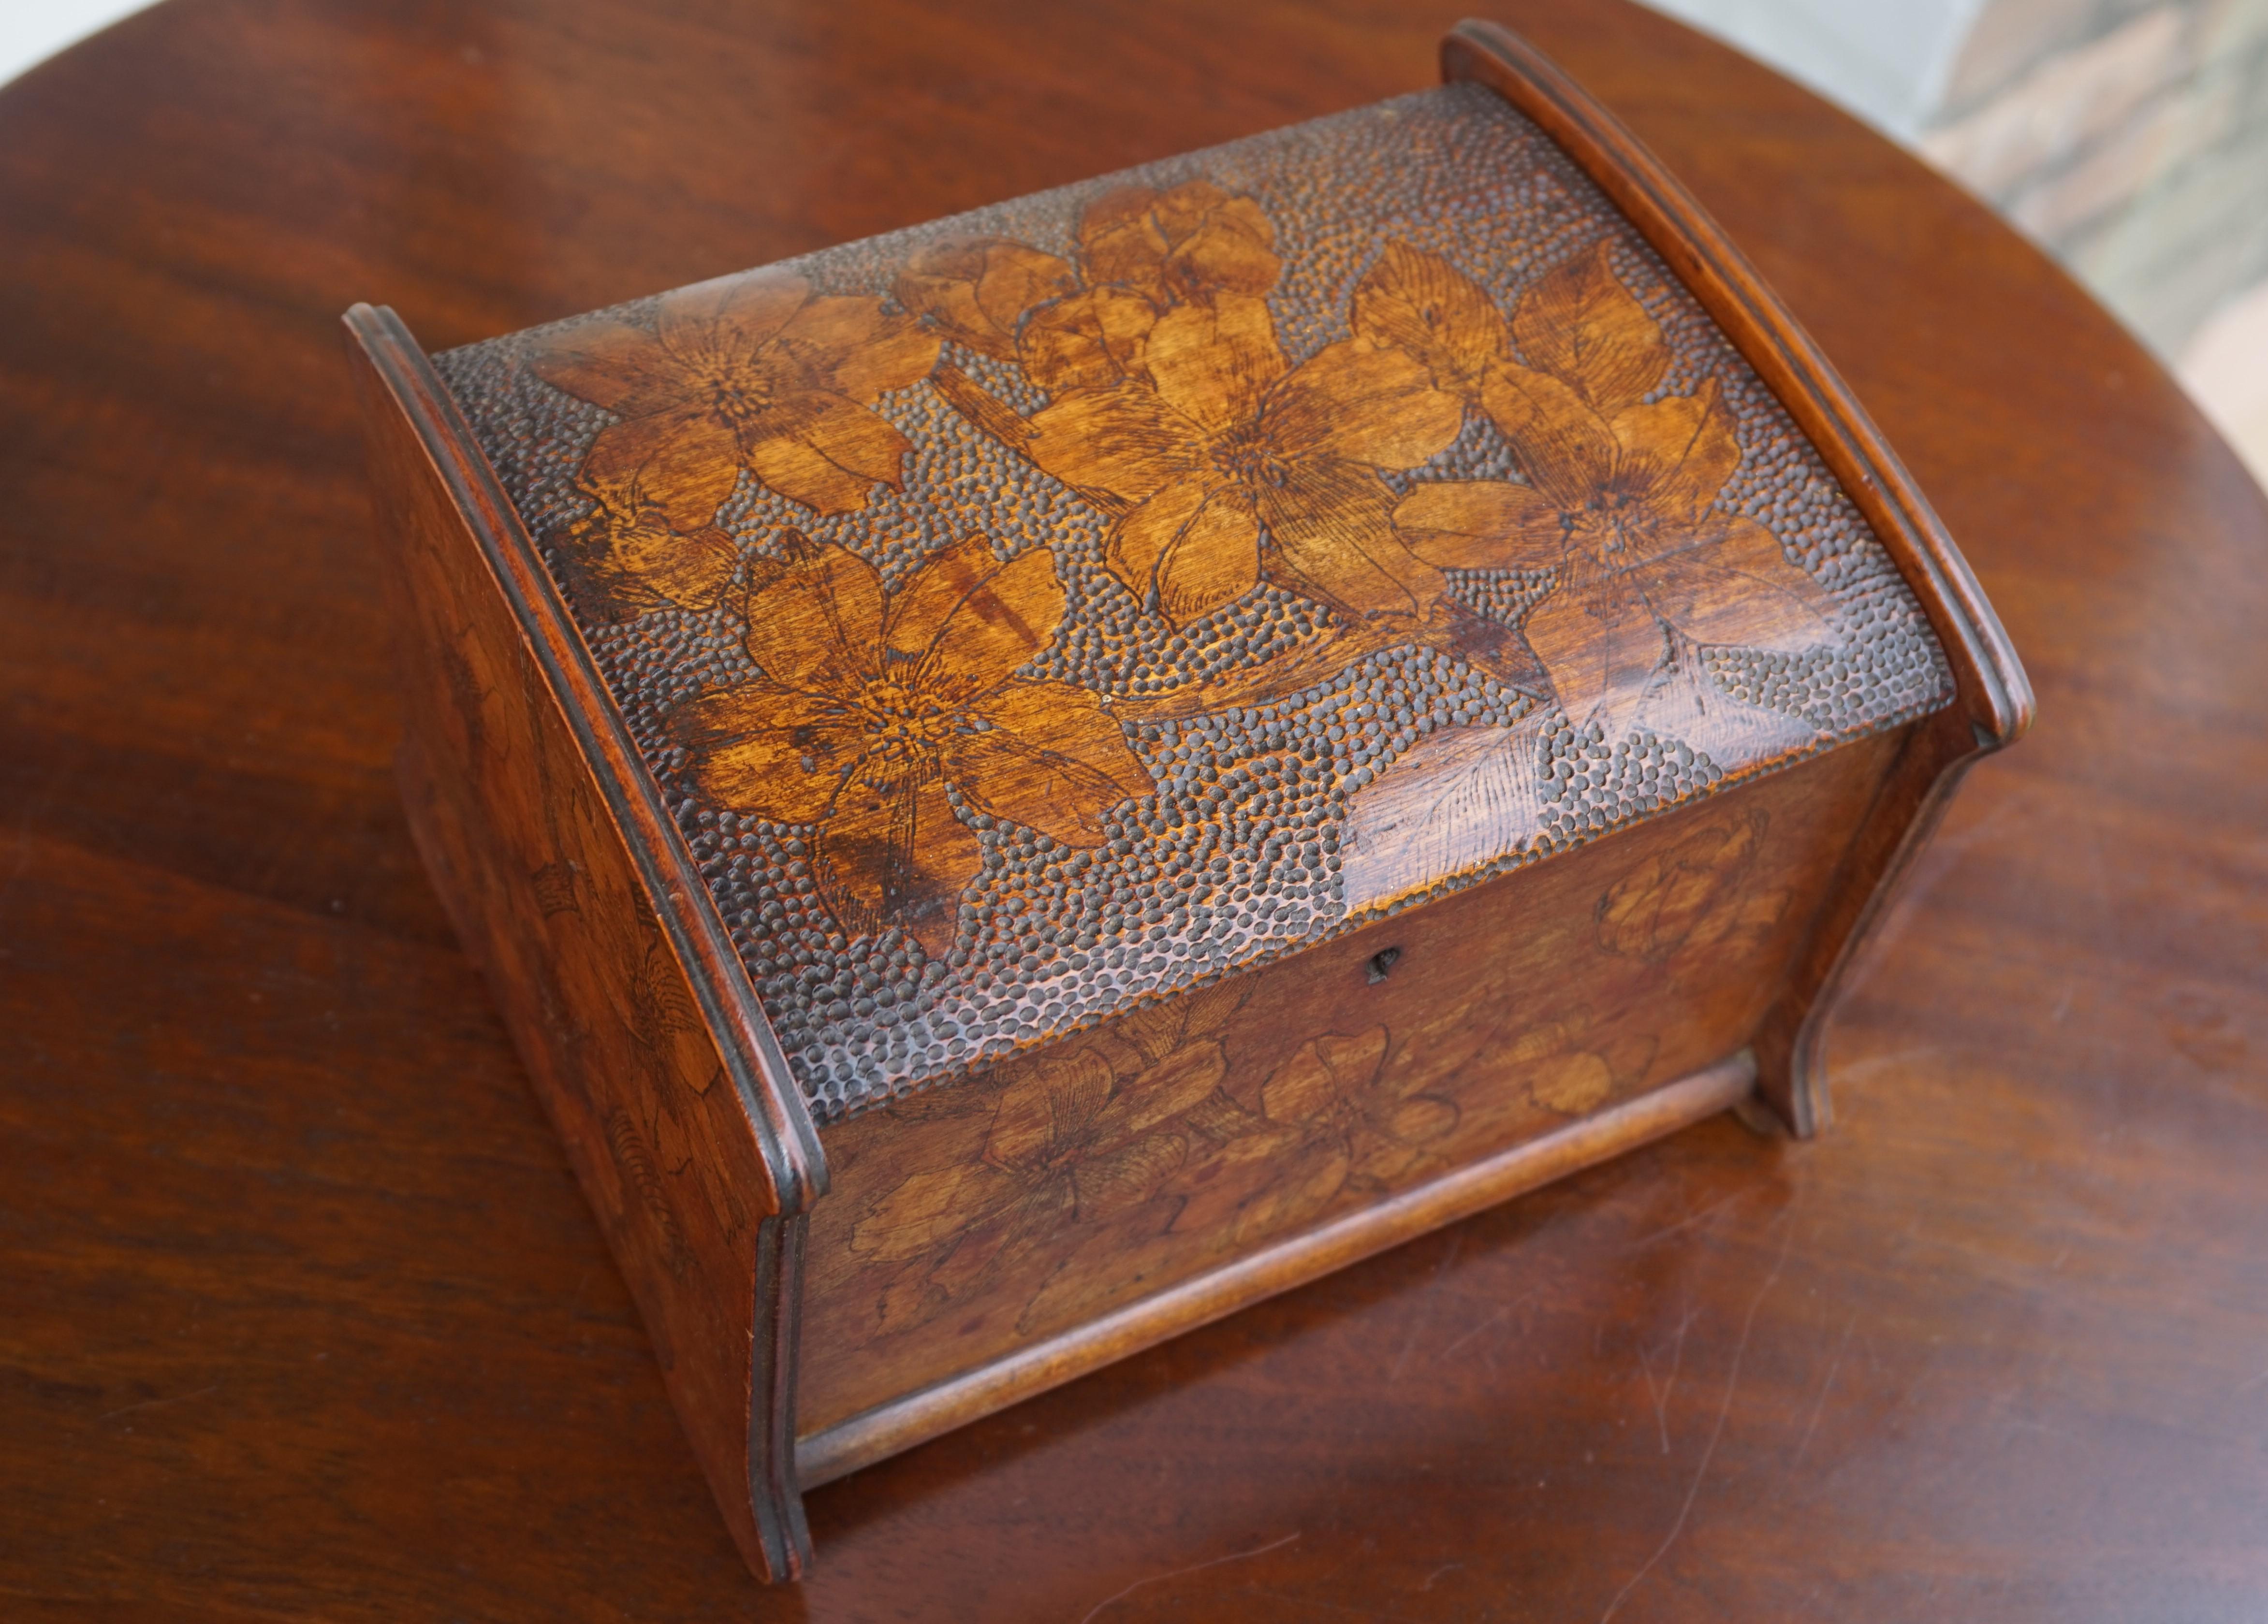 Stunning Arts & Crafts Box with Finest Hand Carved Flower Patterns in Bas Relief 3